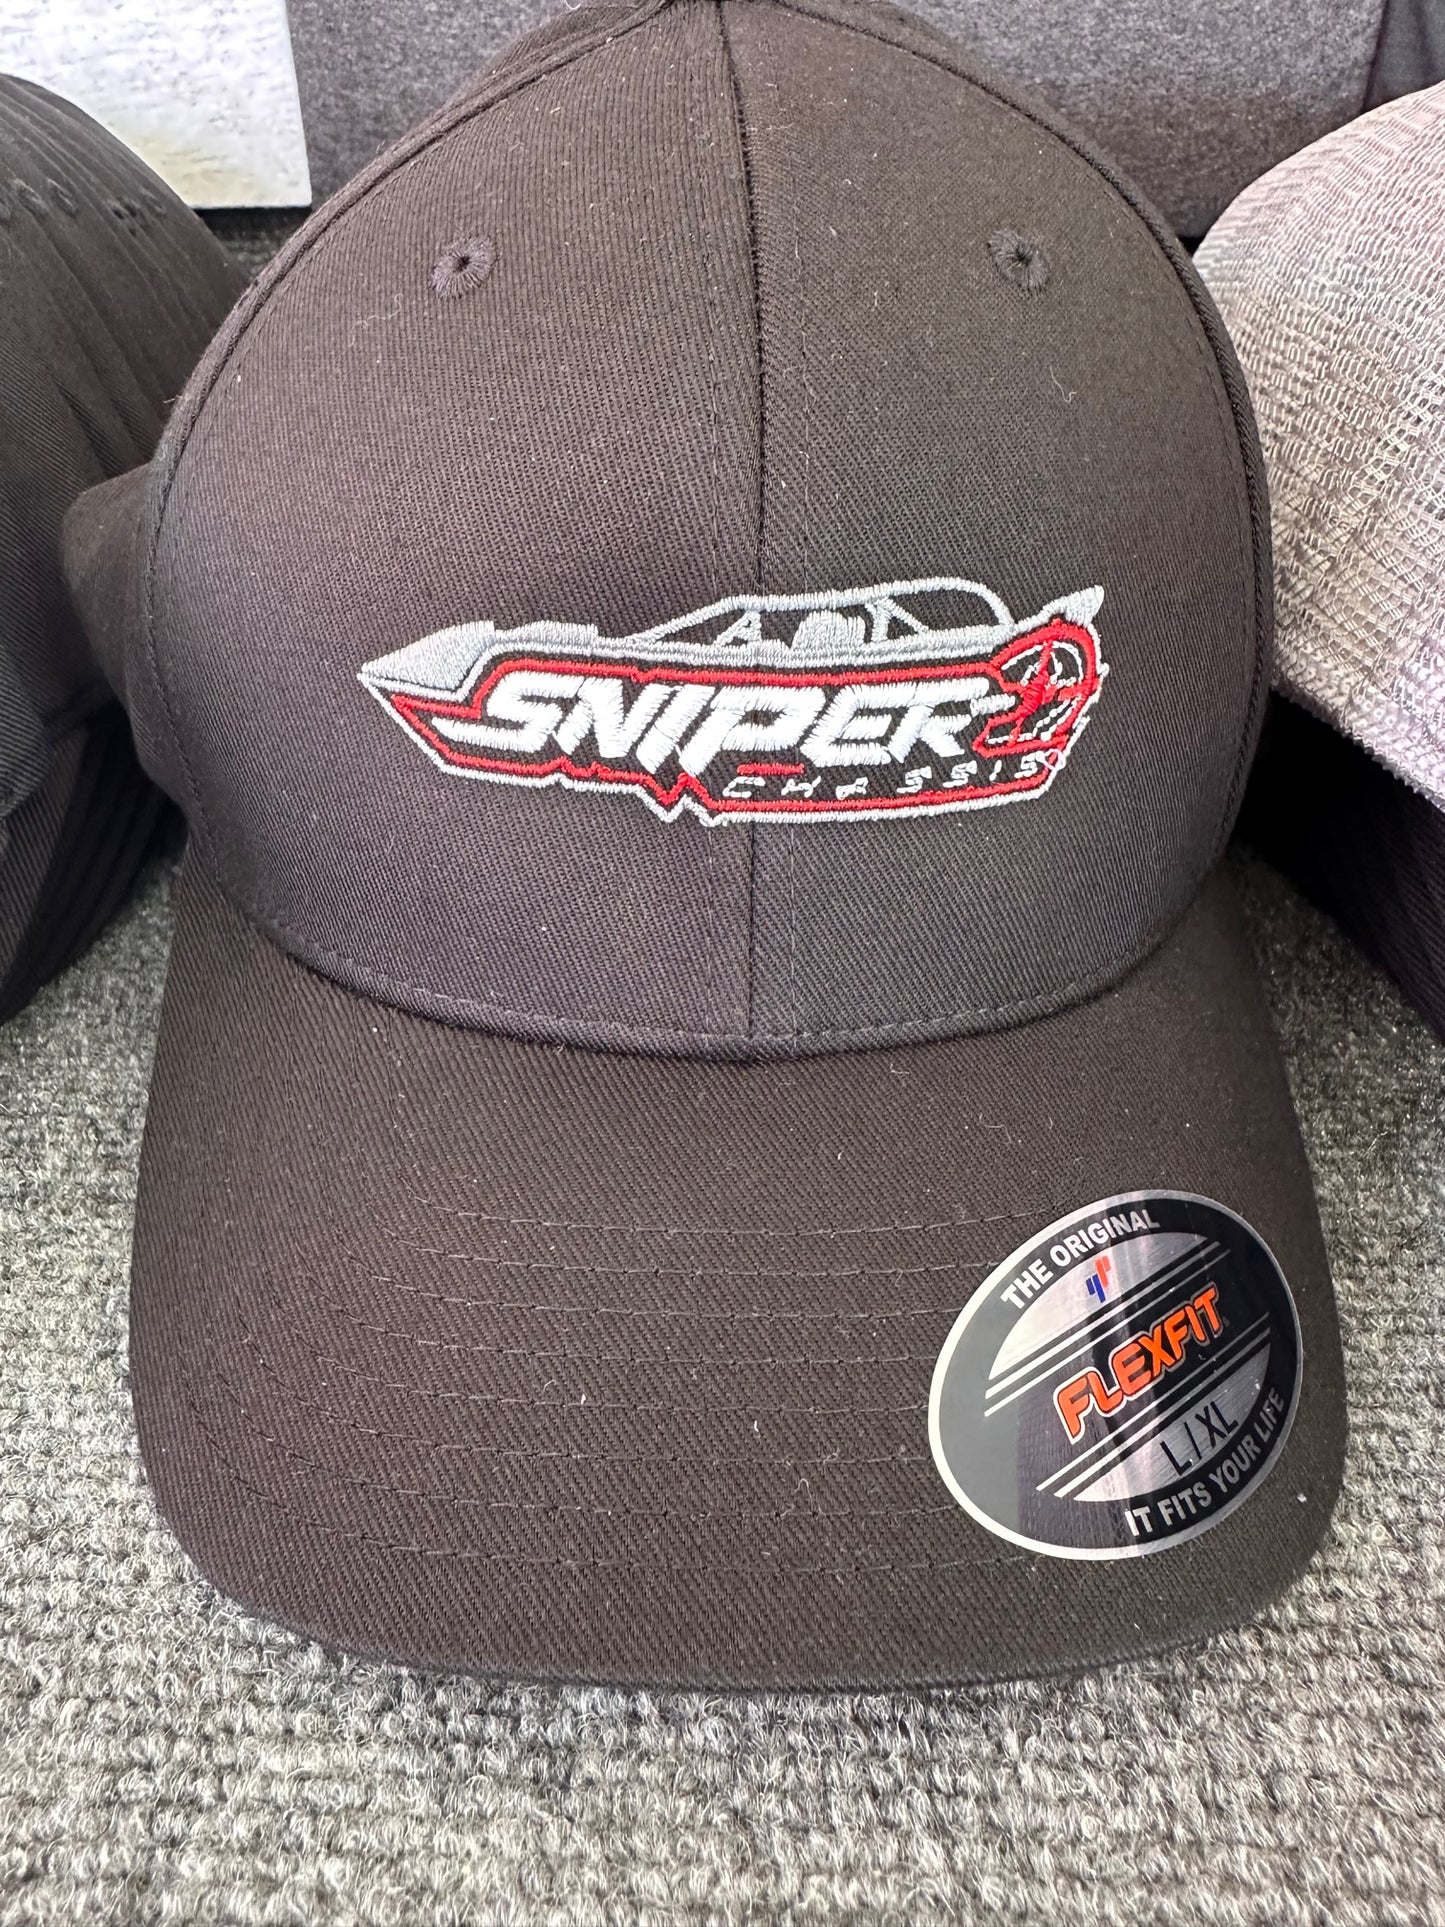 Ricky Weiss Sniper Chassis flex-fit hat